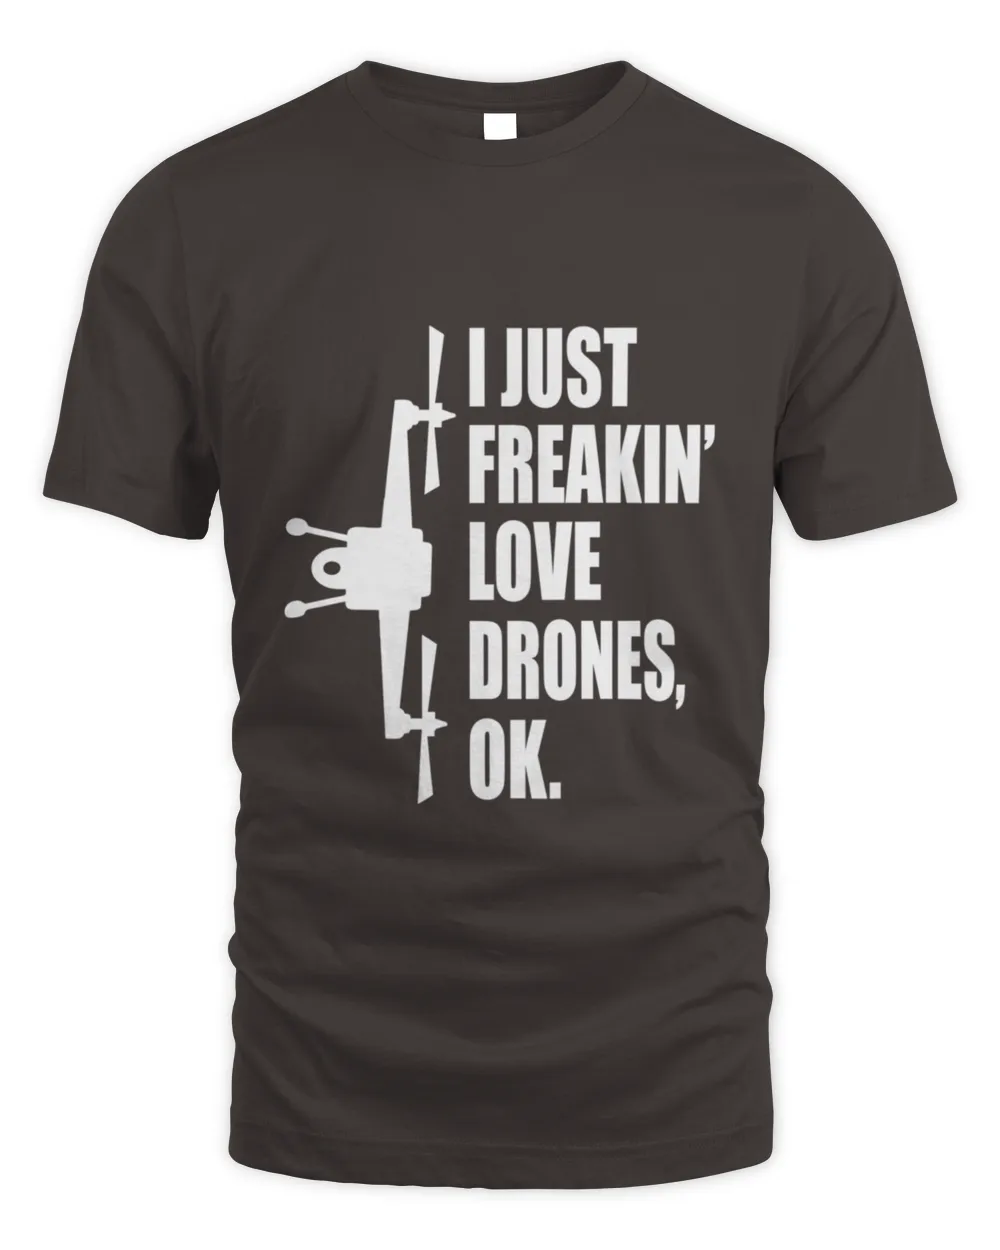 I Just Freakin Love Drones Quote T-Shirt